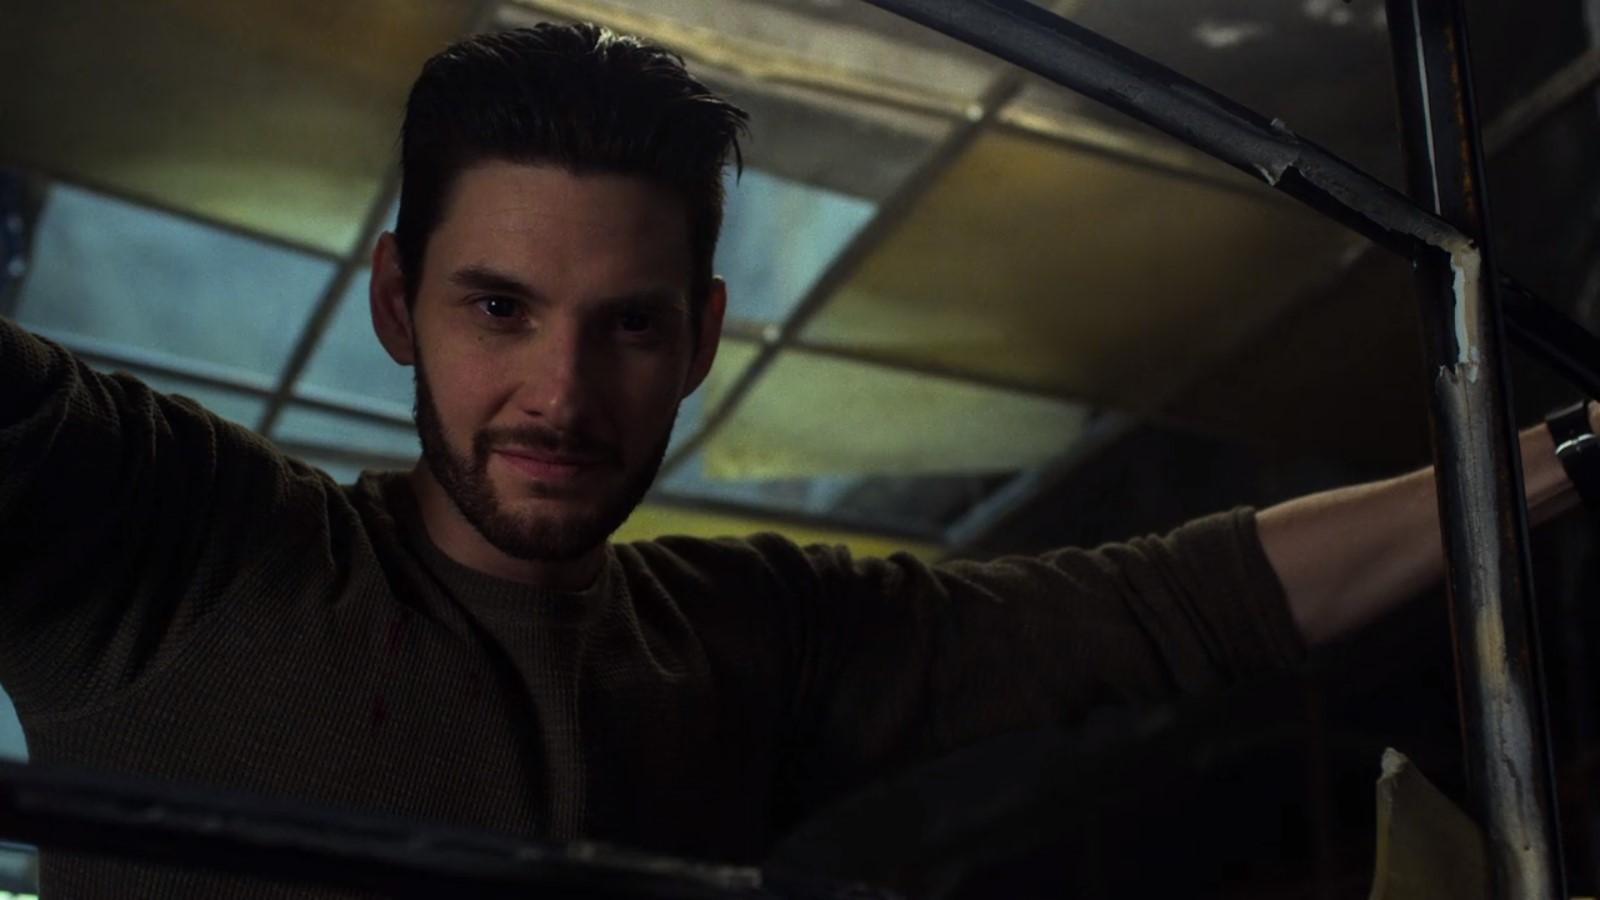 Praise For Ben Barnes' Outstanding Performance In 'The